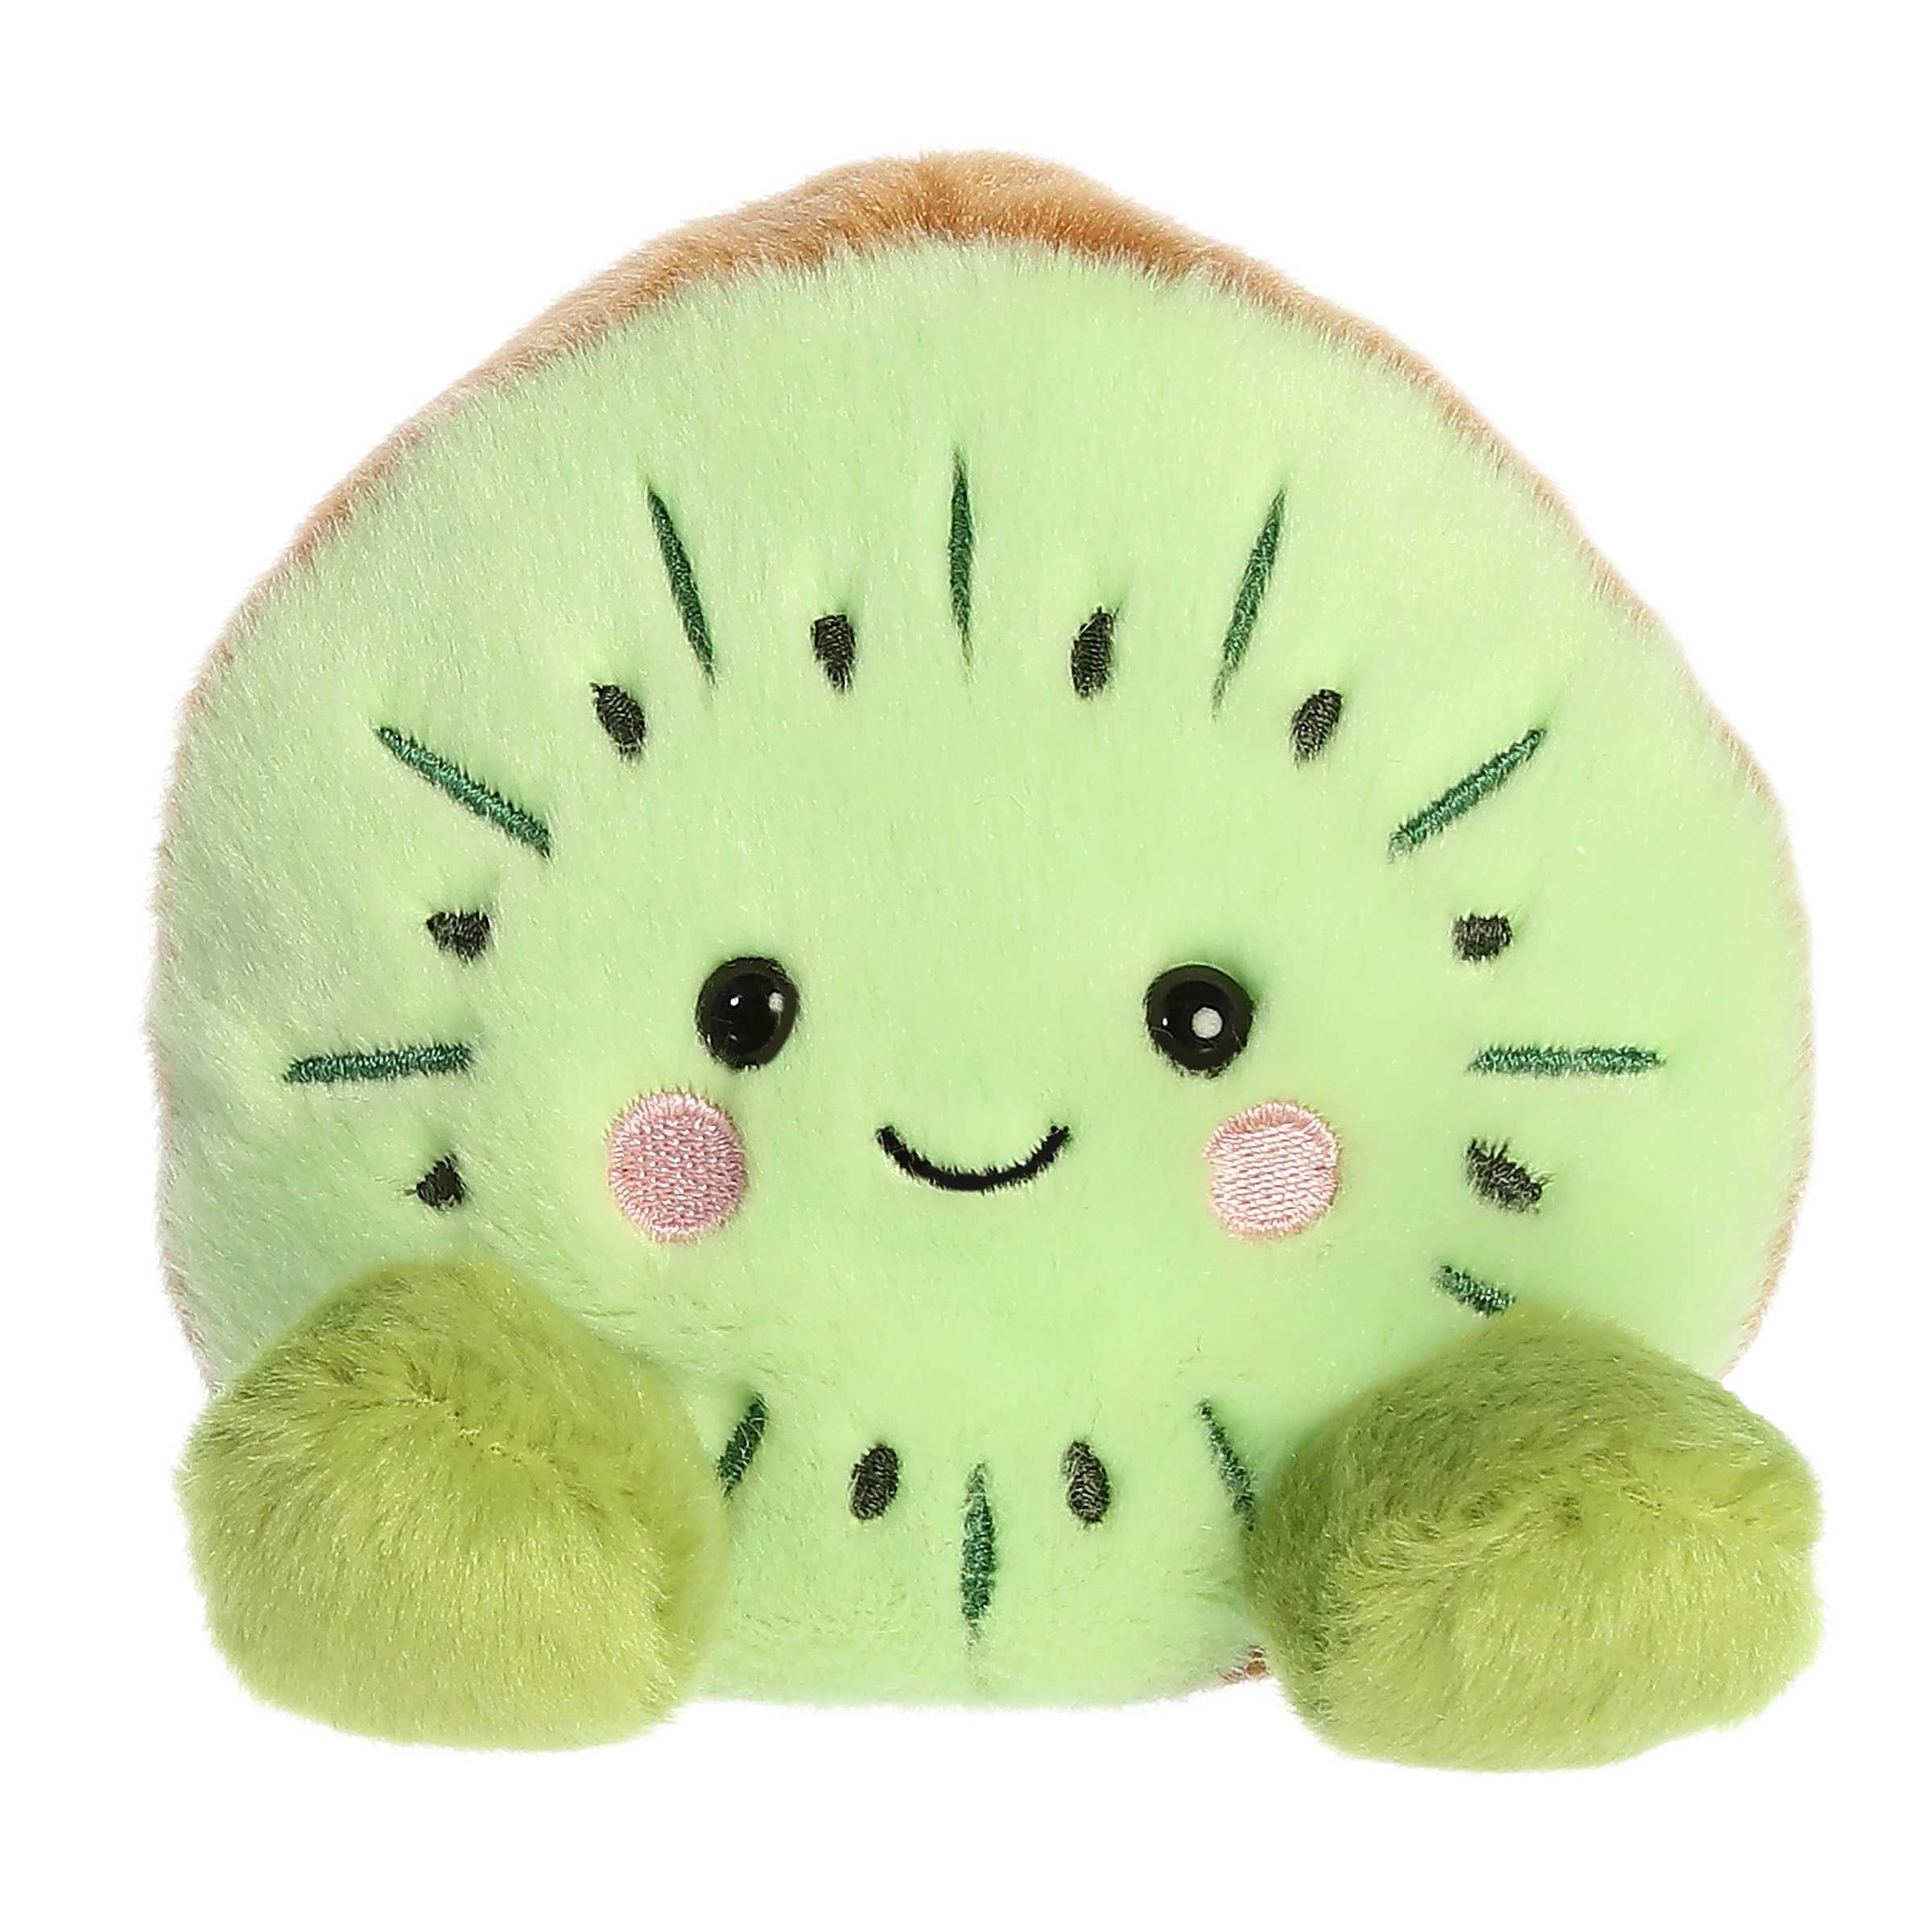 Kimber Kiwi is a delightful kiwi plush representation of the fruit, with a fuzzy lime-green exterior and a soft brown edge!